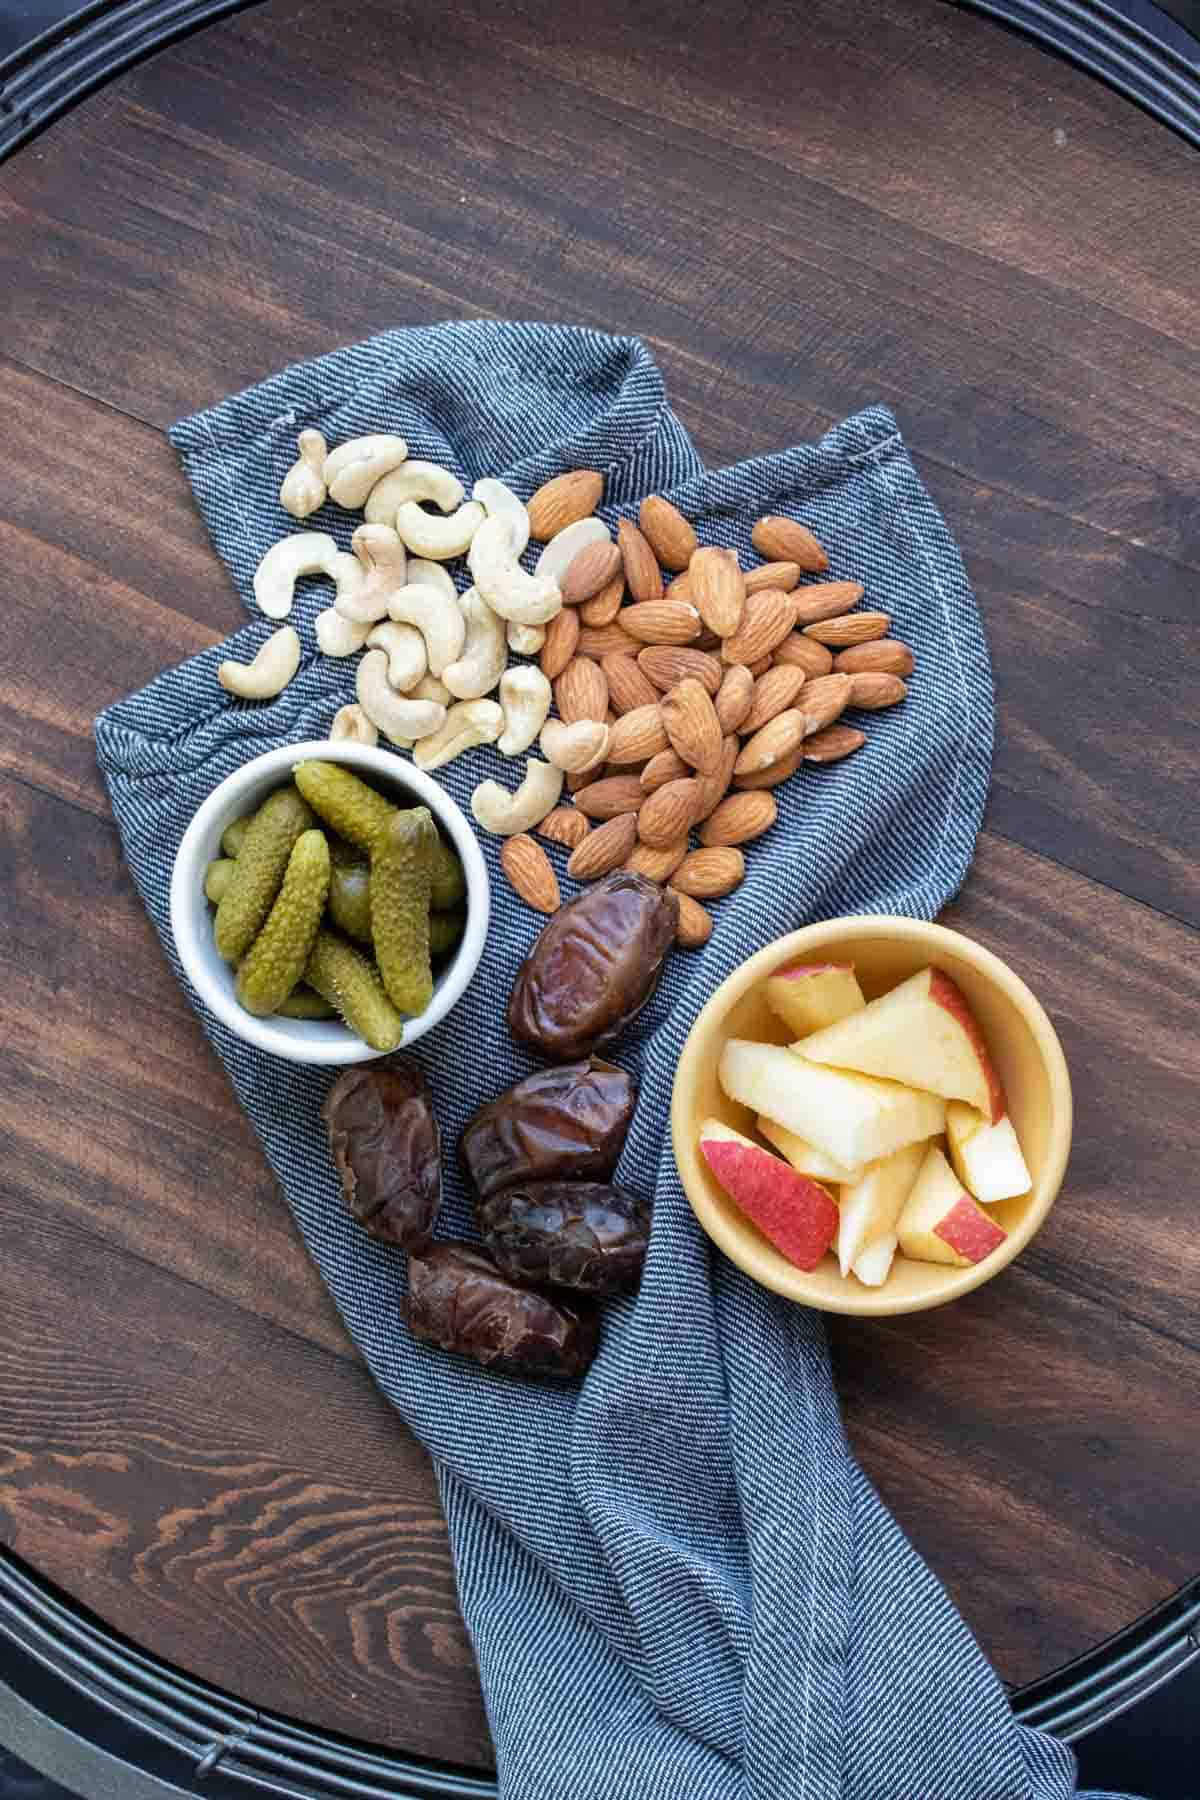 Nuts, pickles and fruit in bowls and laying on a navy towel